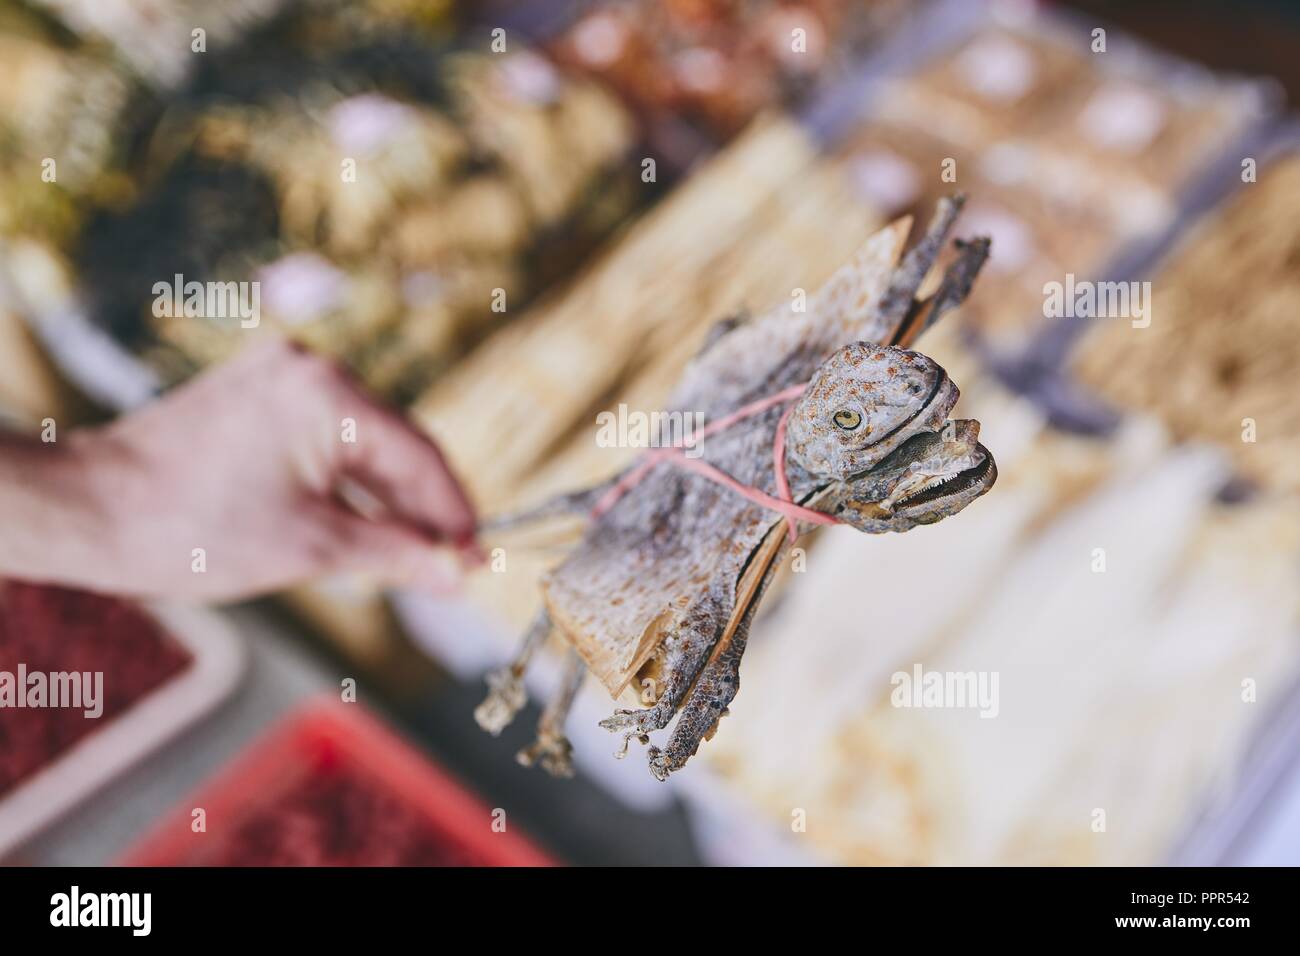 Human hand holding dried tokay gecko in shop of traditional Chinese medicine. Chinatown street market in Singapore. Stock Photo